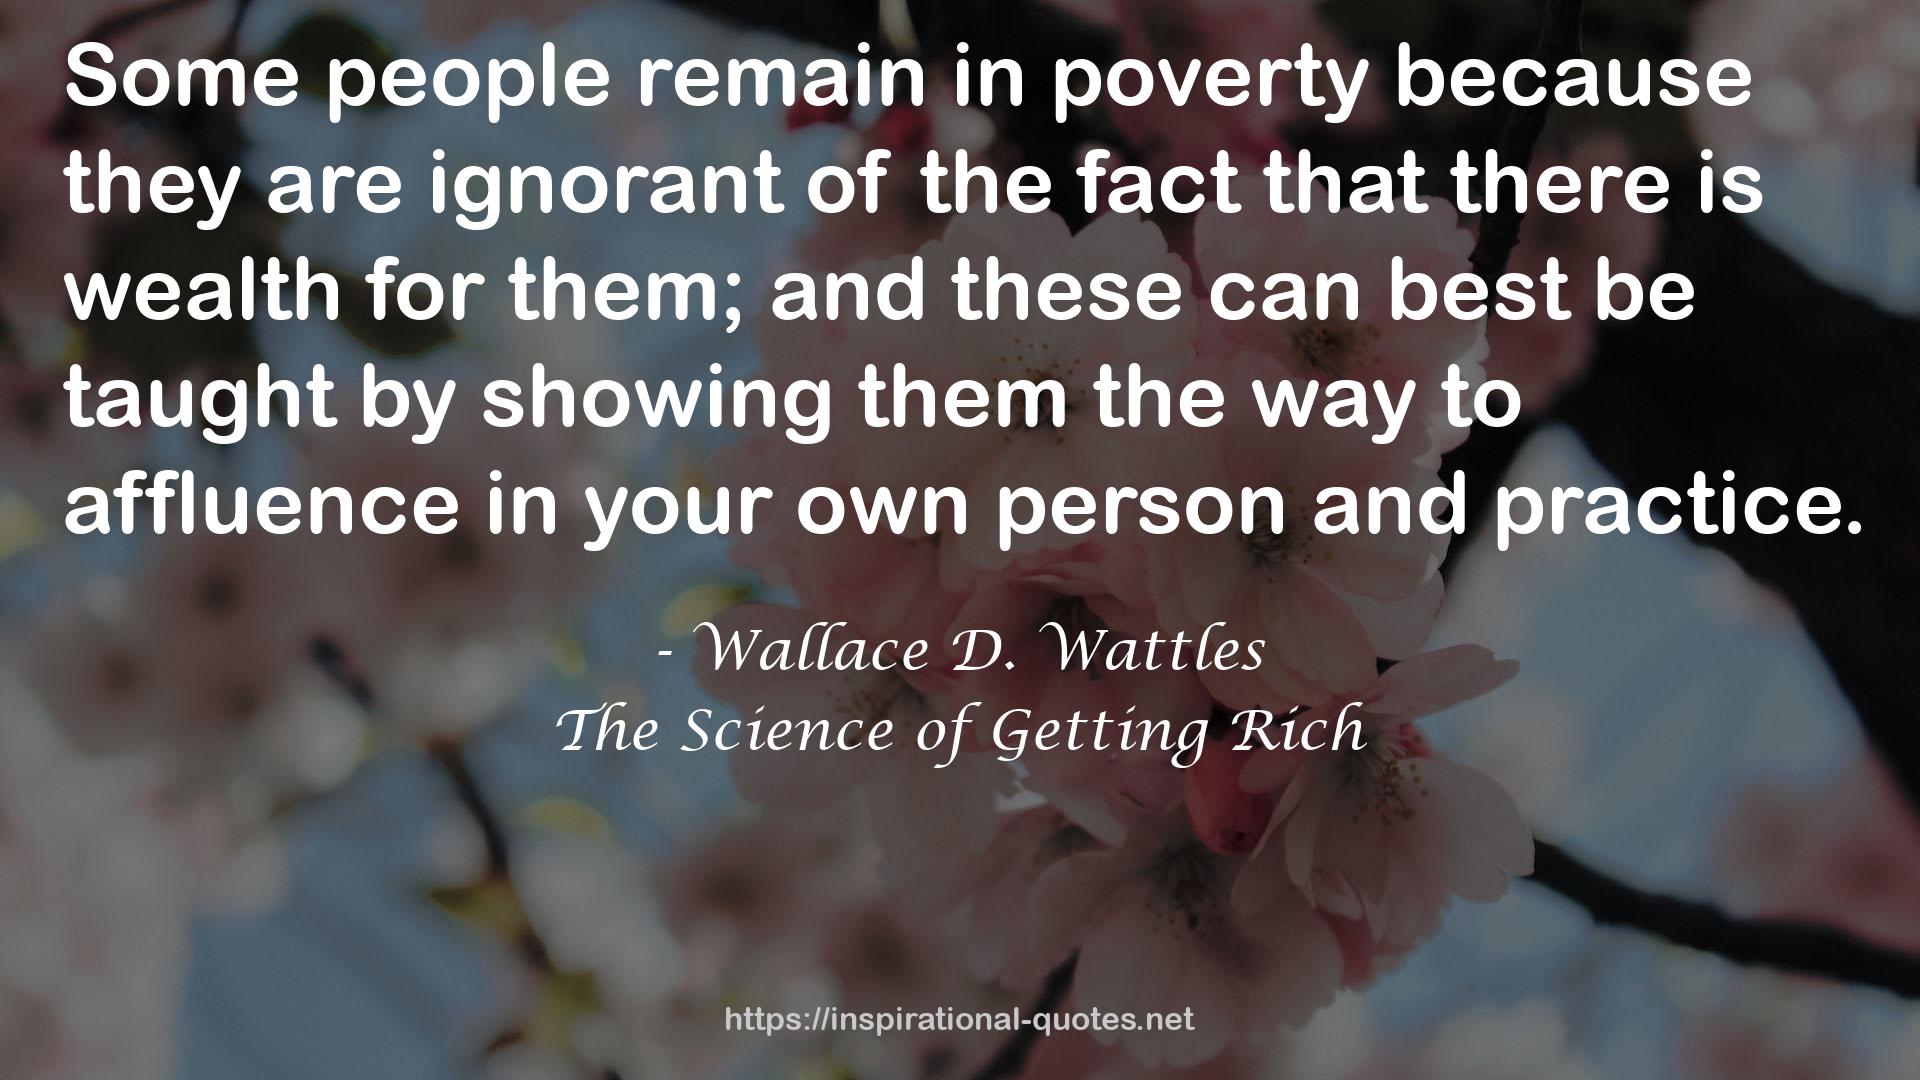 Wallace D. Wattles QUOTES